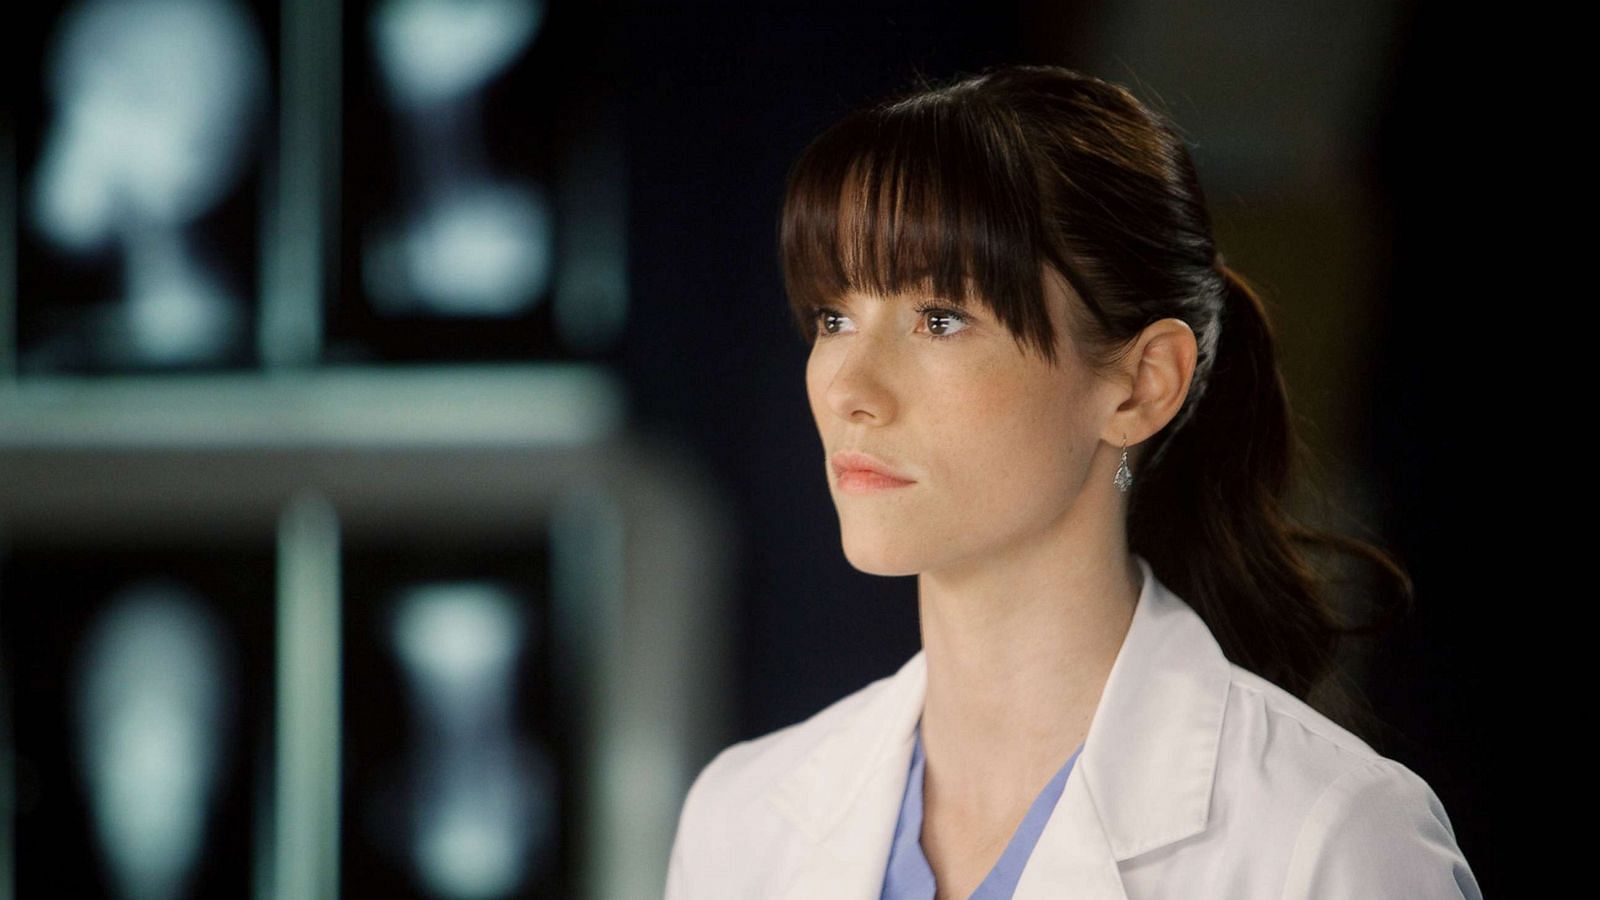 Lexie Grey is portrayed by Chyler Leigh on Grey